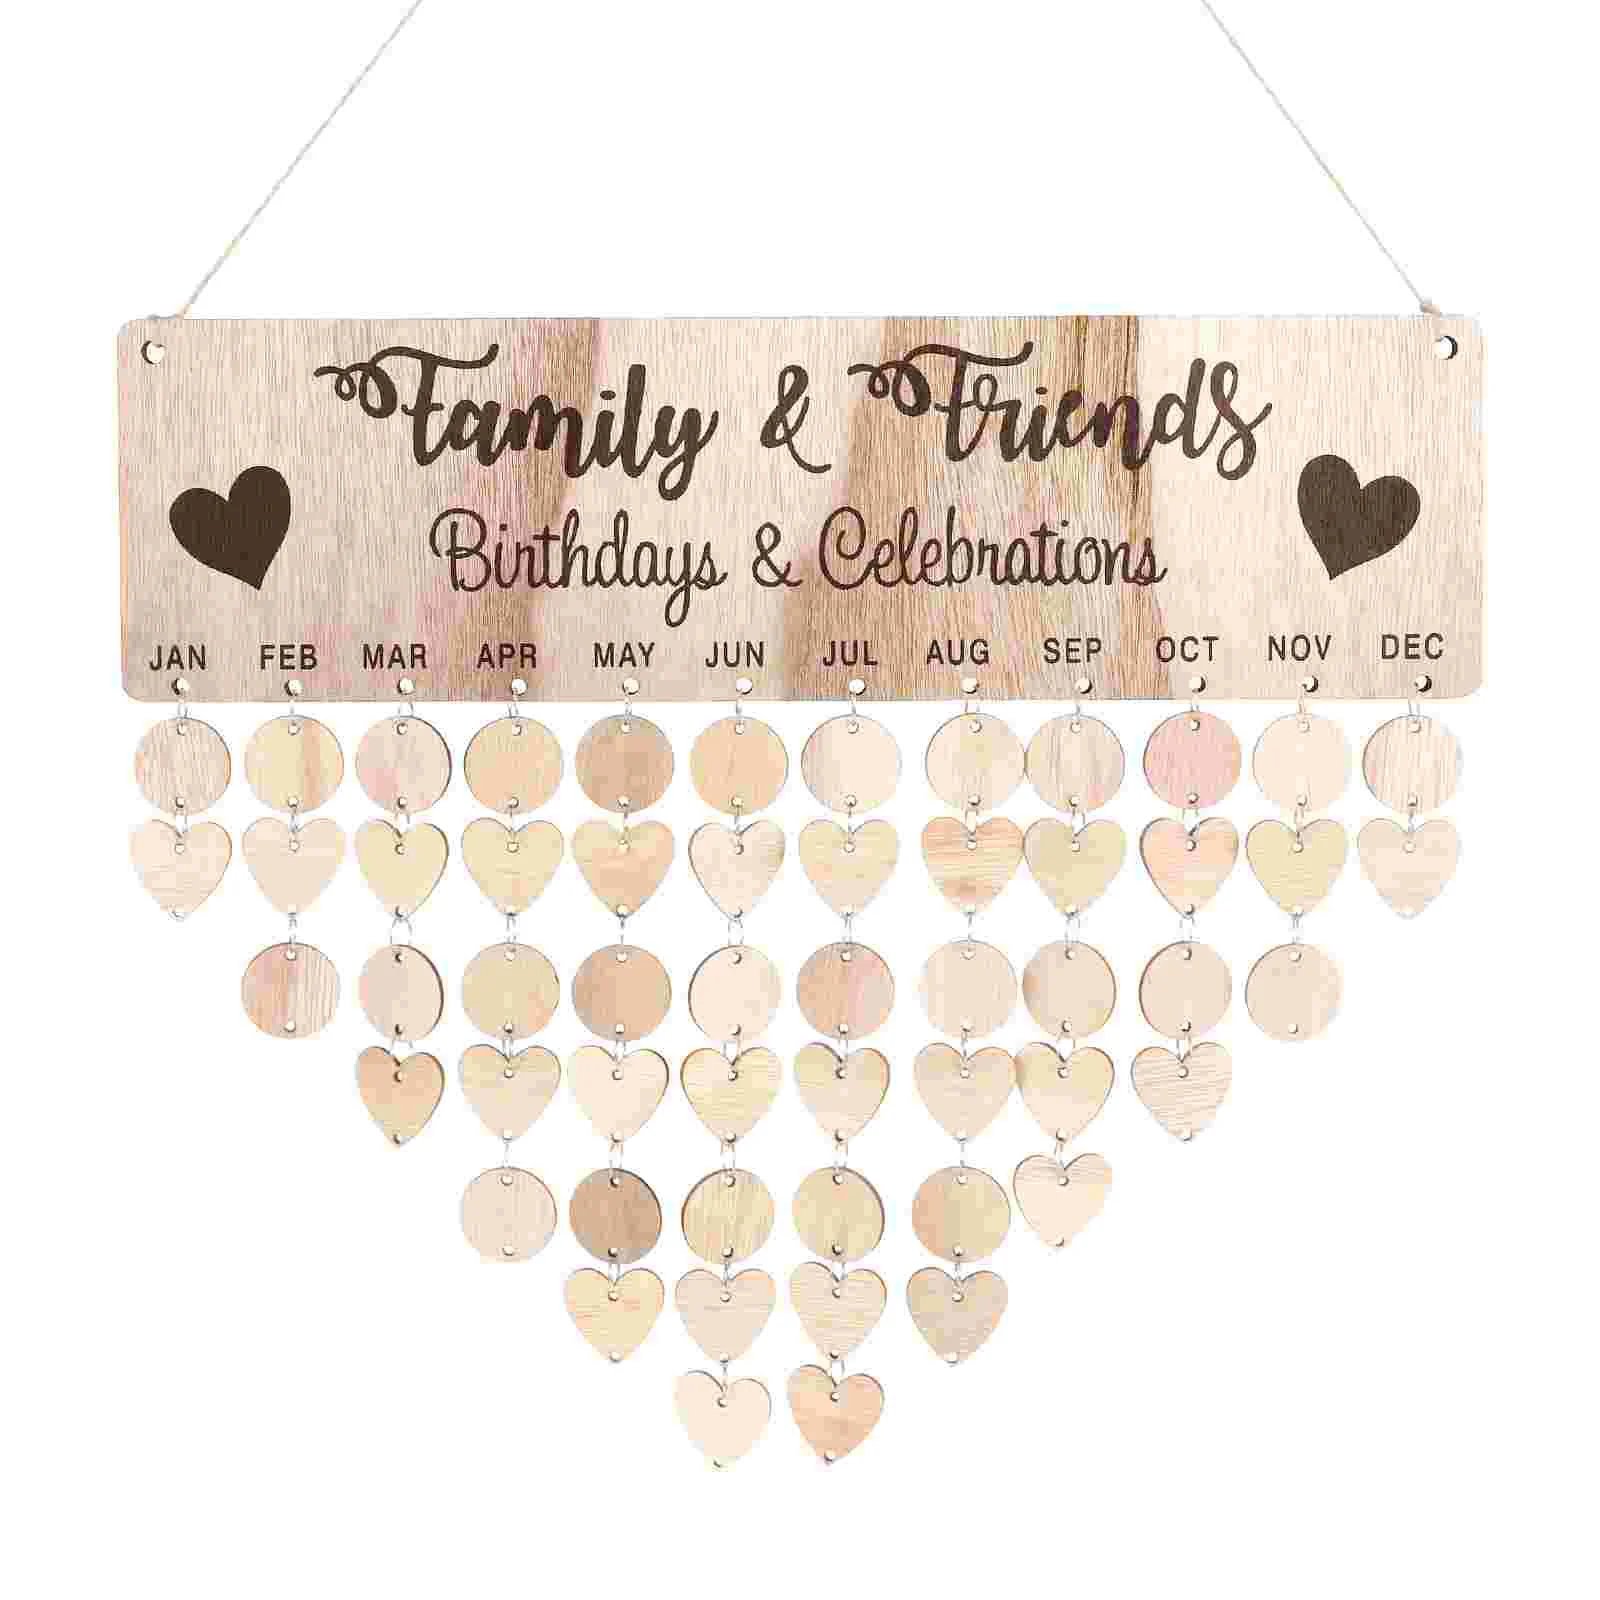 Calendar Birthday Family Board Hanging Wooden Wall Reminder Plaque Diy Personalized Wood Gifts Date Reminding Home Decor Tags hot chritsmas birthday special days reminder board home hanging decor wooden calendar board hanging ornament new year decoration